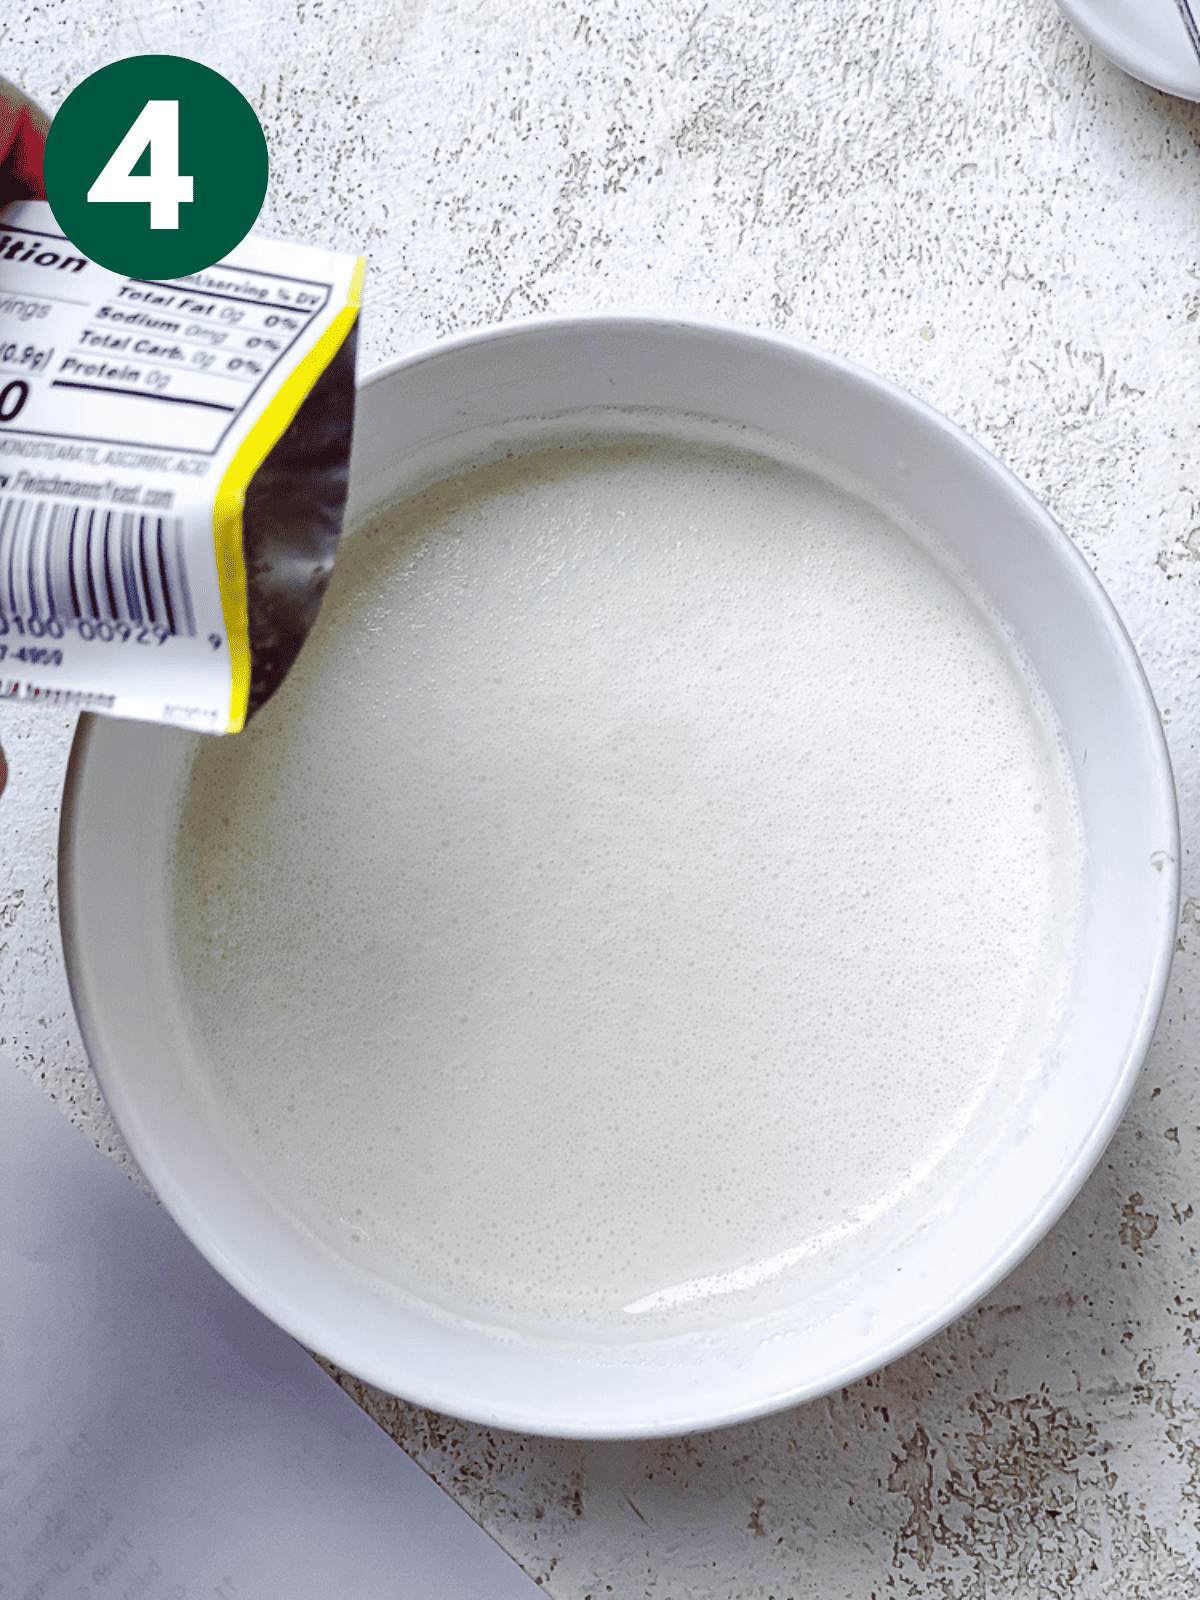 pouring a packet of yeast into a bowl of vegan ،ermilk.